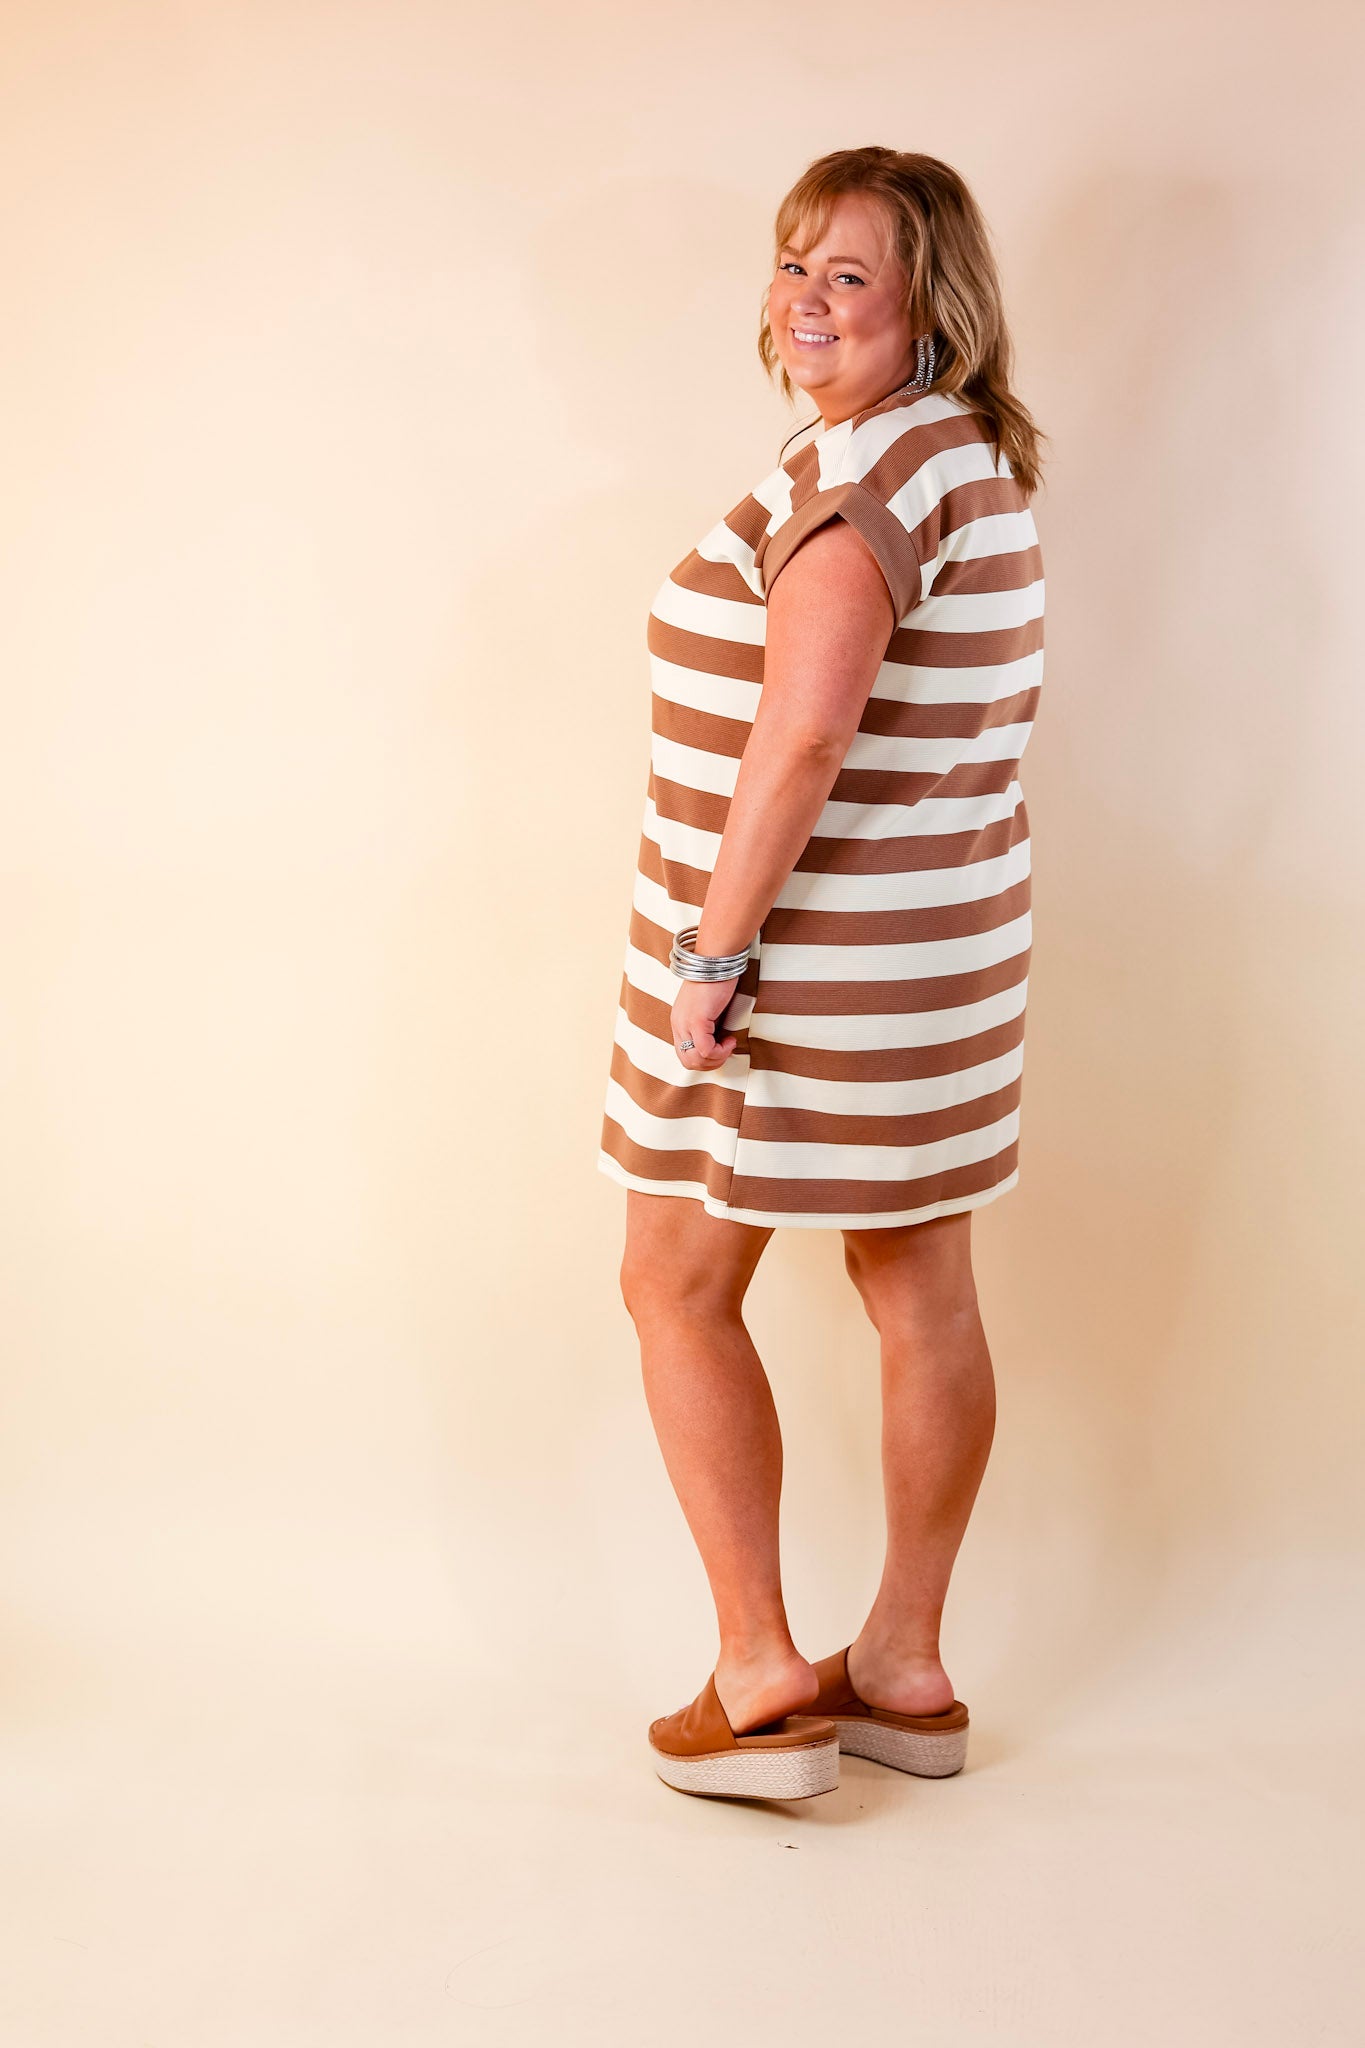 Stripe it Simple Striped Dress with Cap Sleeves in Taupe and Cream - Giddy Up Glamour Boutique